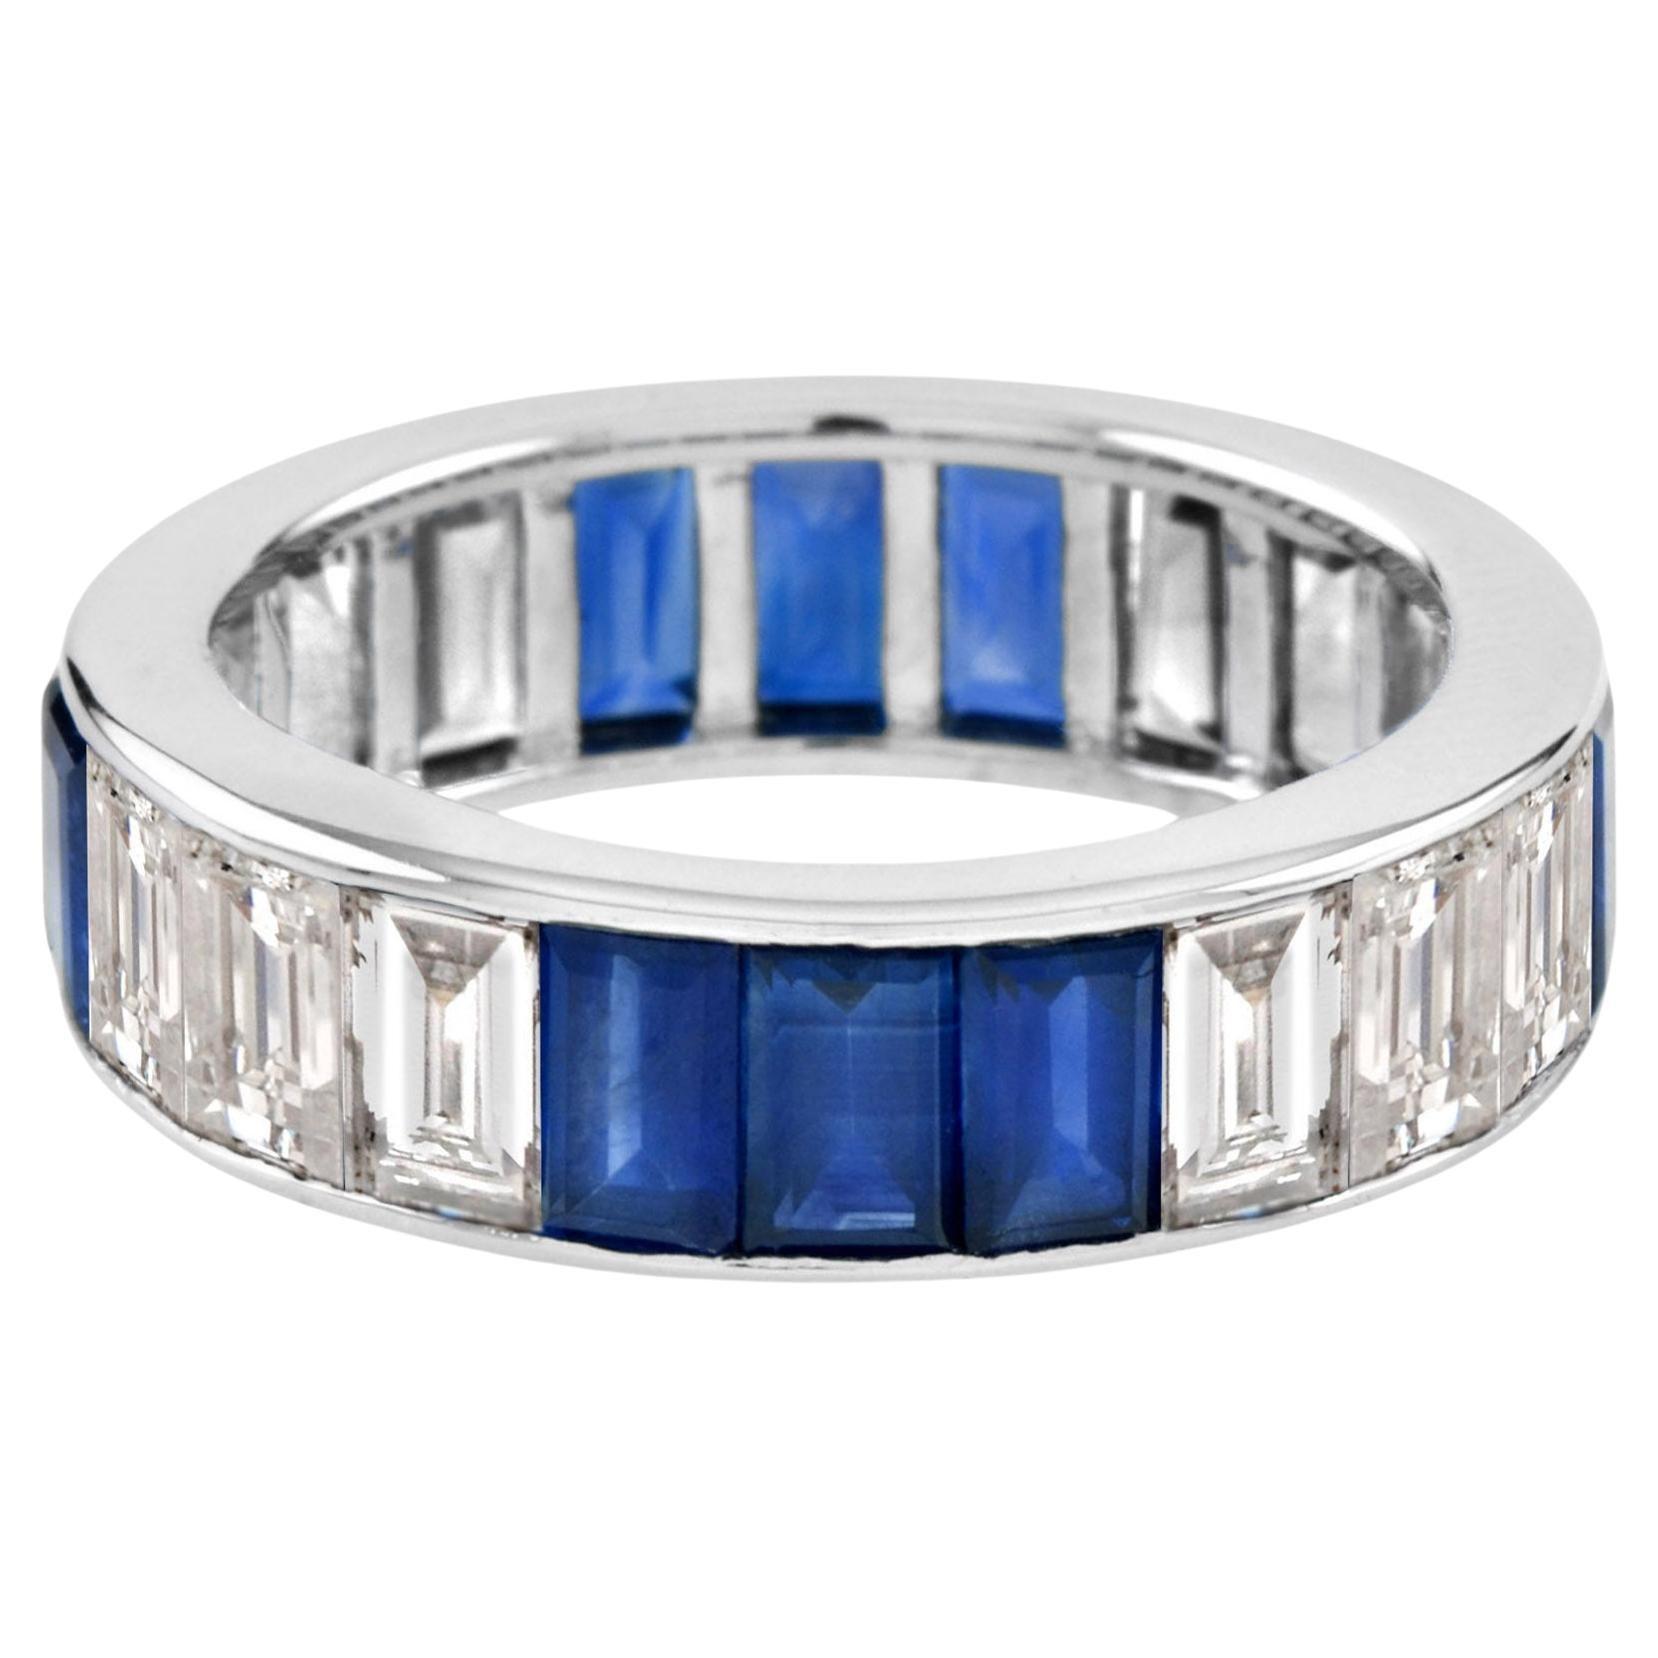 Seamless 3.3 Ct. Baguette Diamond and Blue Sapphire Band Ring in Platinum950